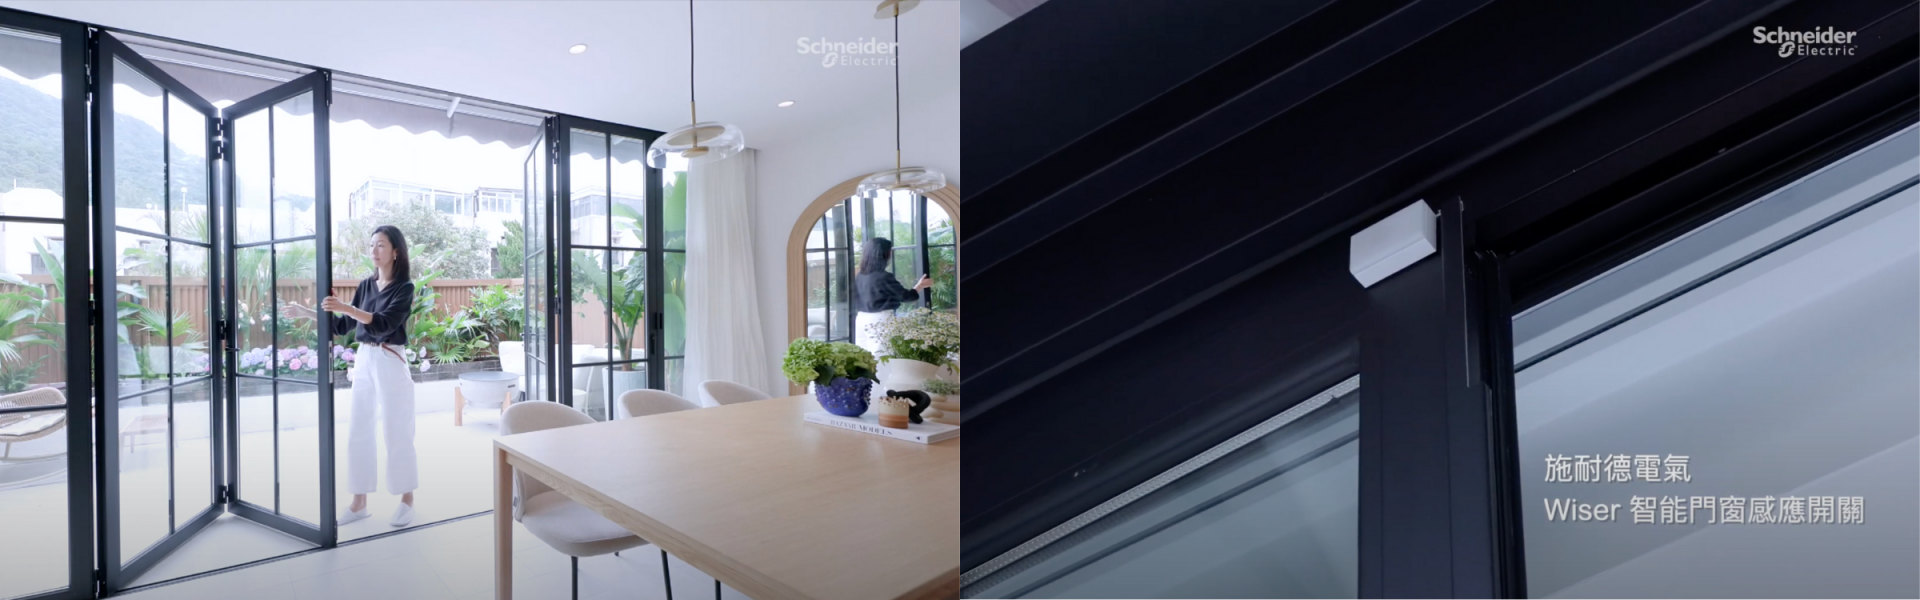 Schneider Electric's Wiser Smart Home Solution is Your Family's Thoughtful Smart Butler